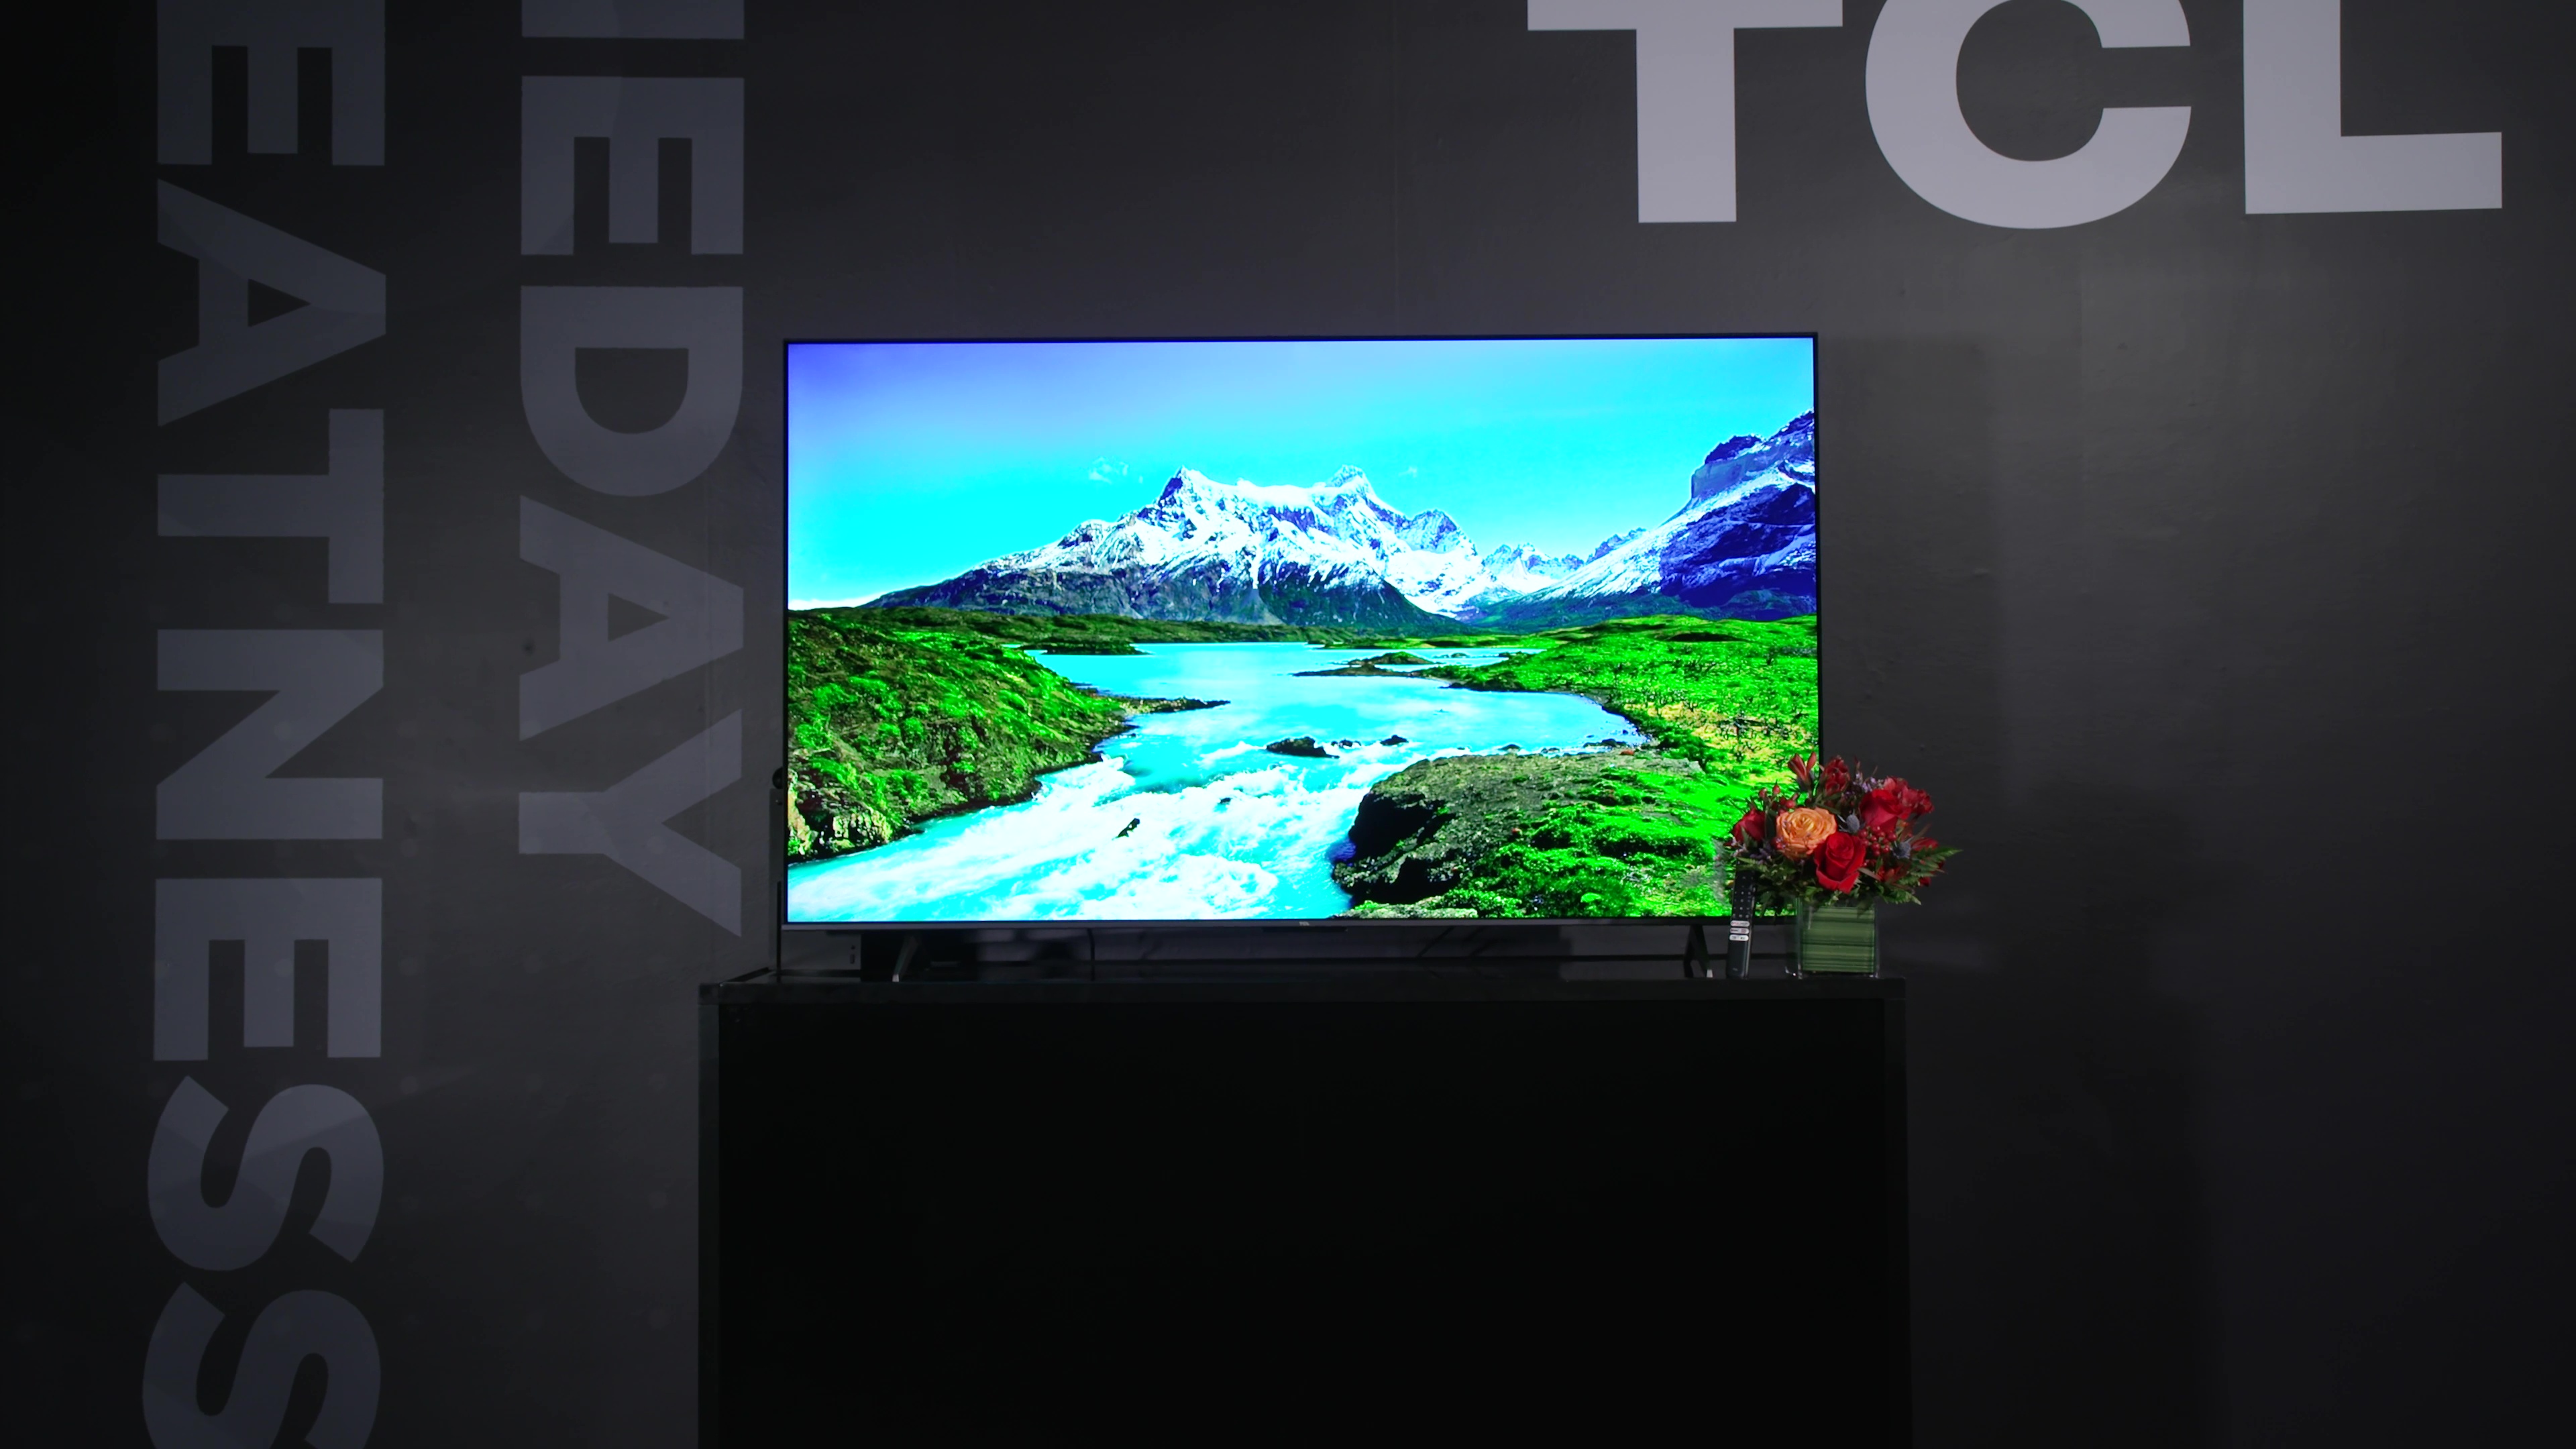 CES 2022: Here's everything we know about TCL's 2022 TV lineup - Reviewed